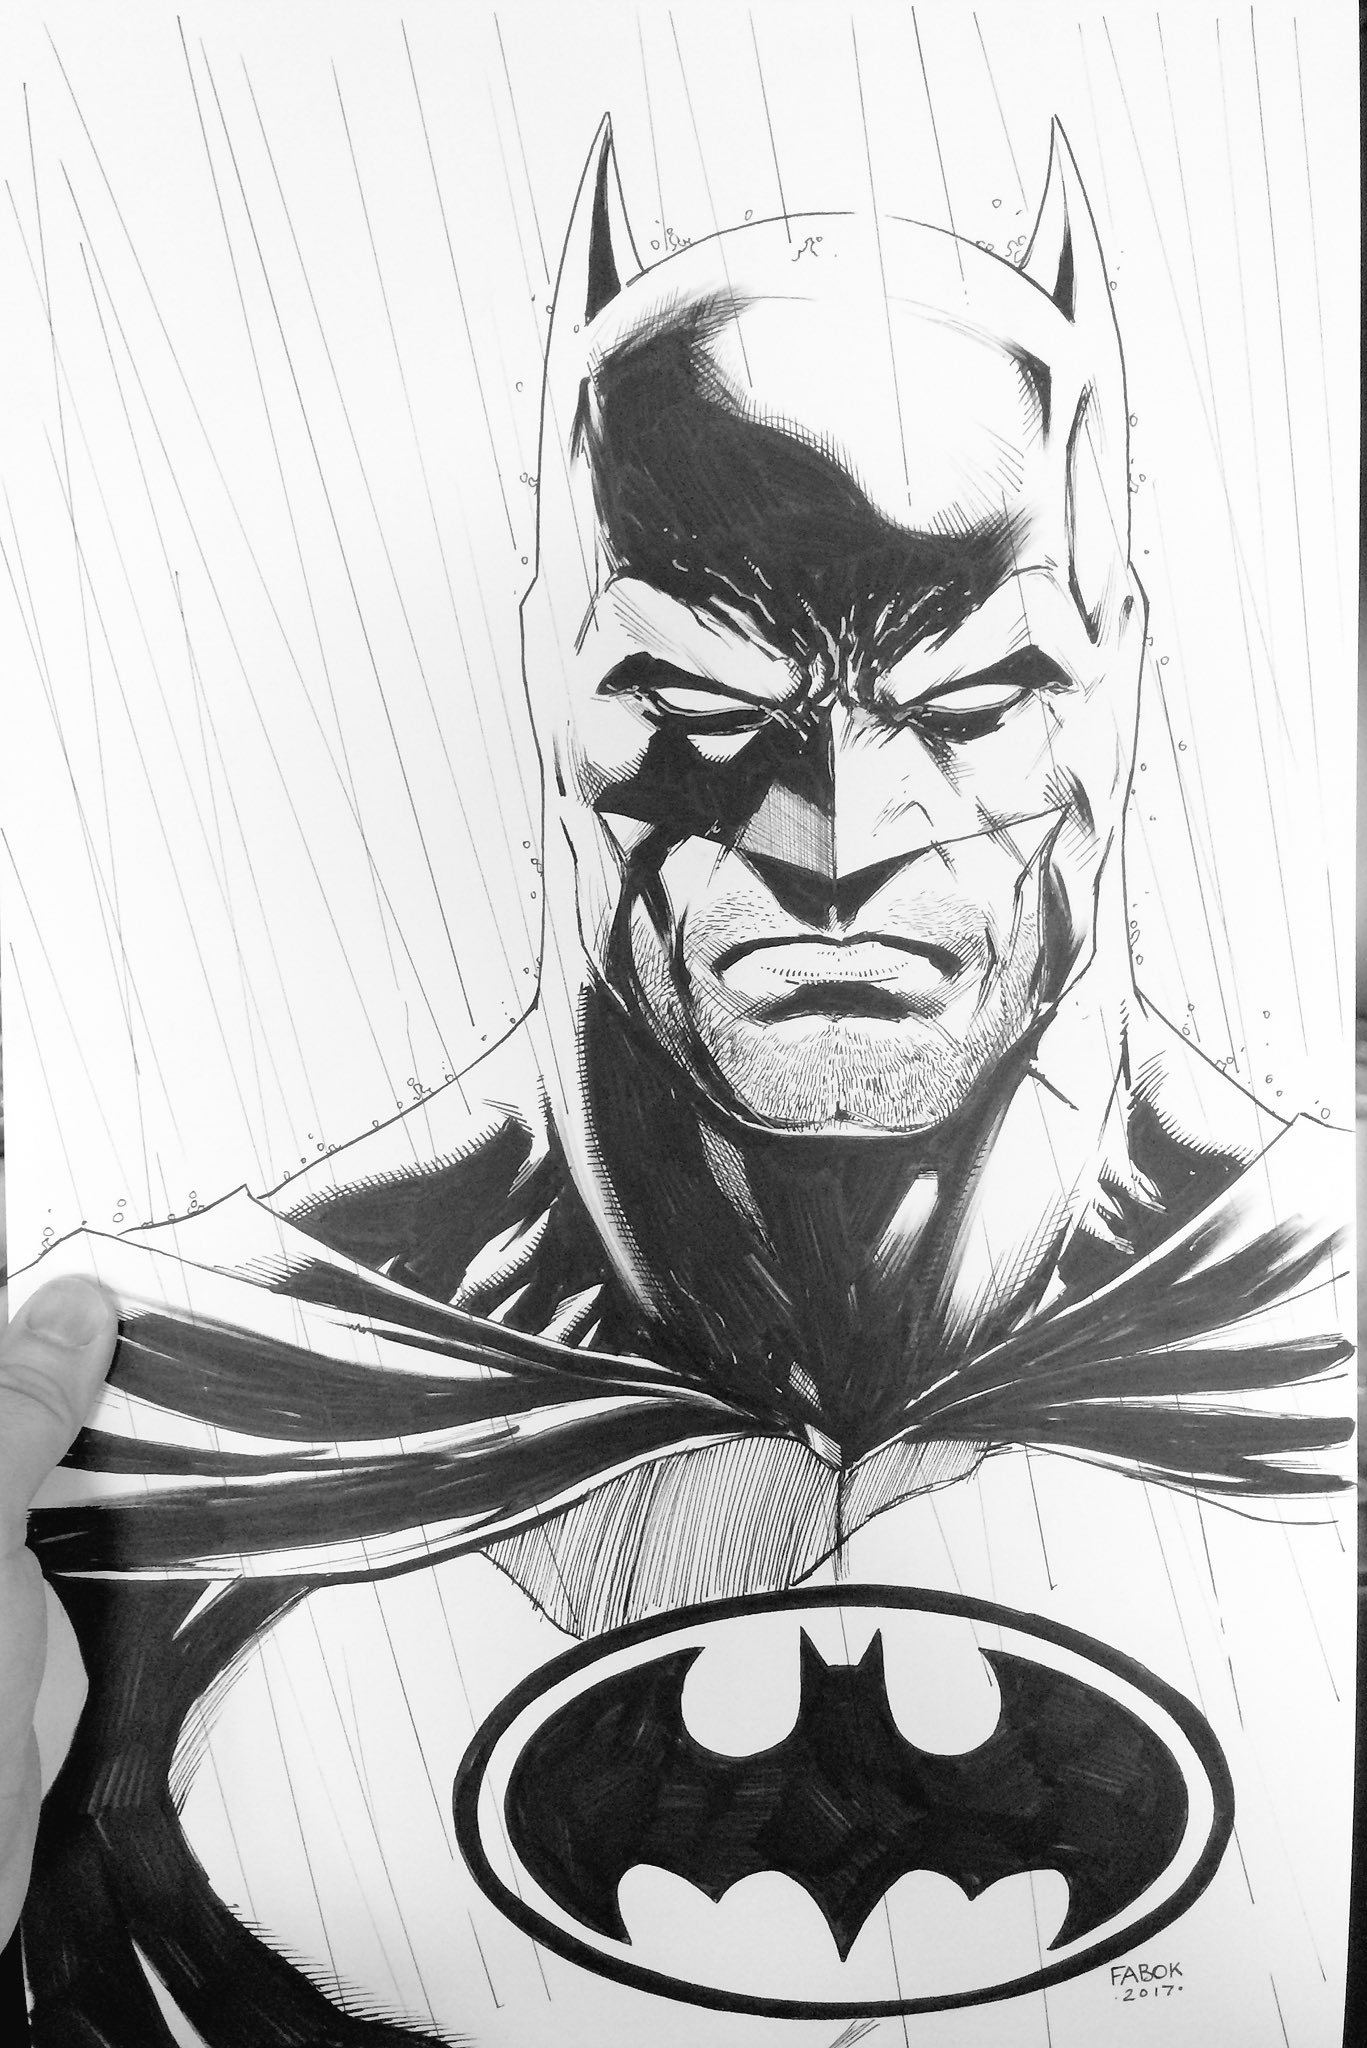 Batman Drawing - Head With Ink Finish by TonyTruongson on DeviantArt